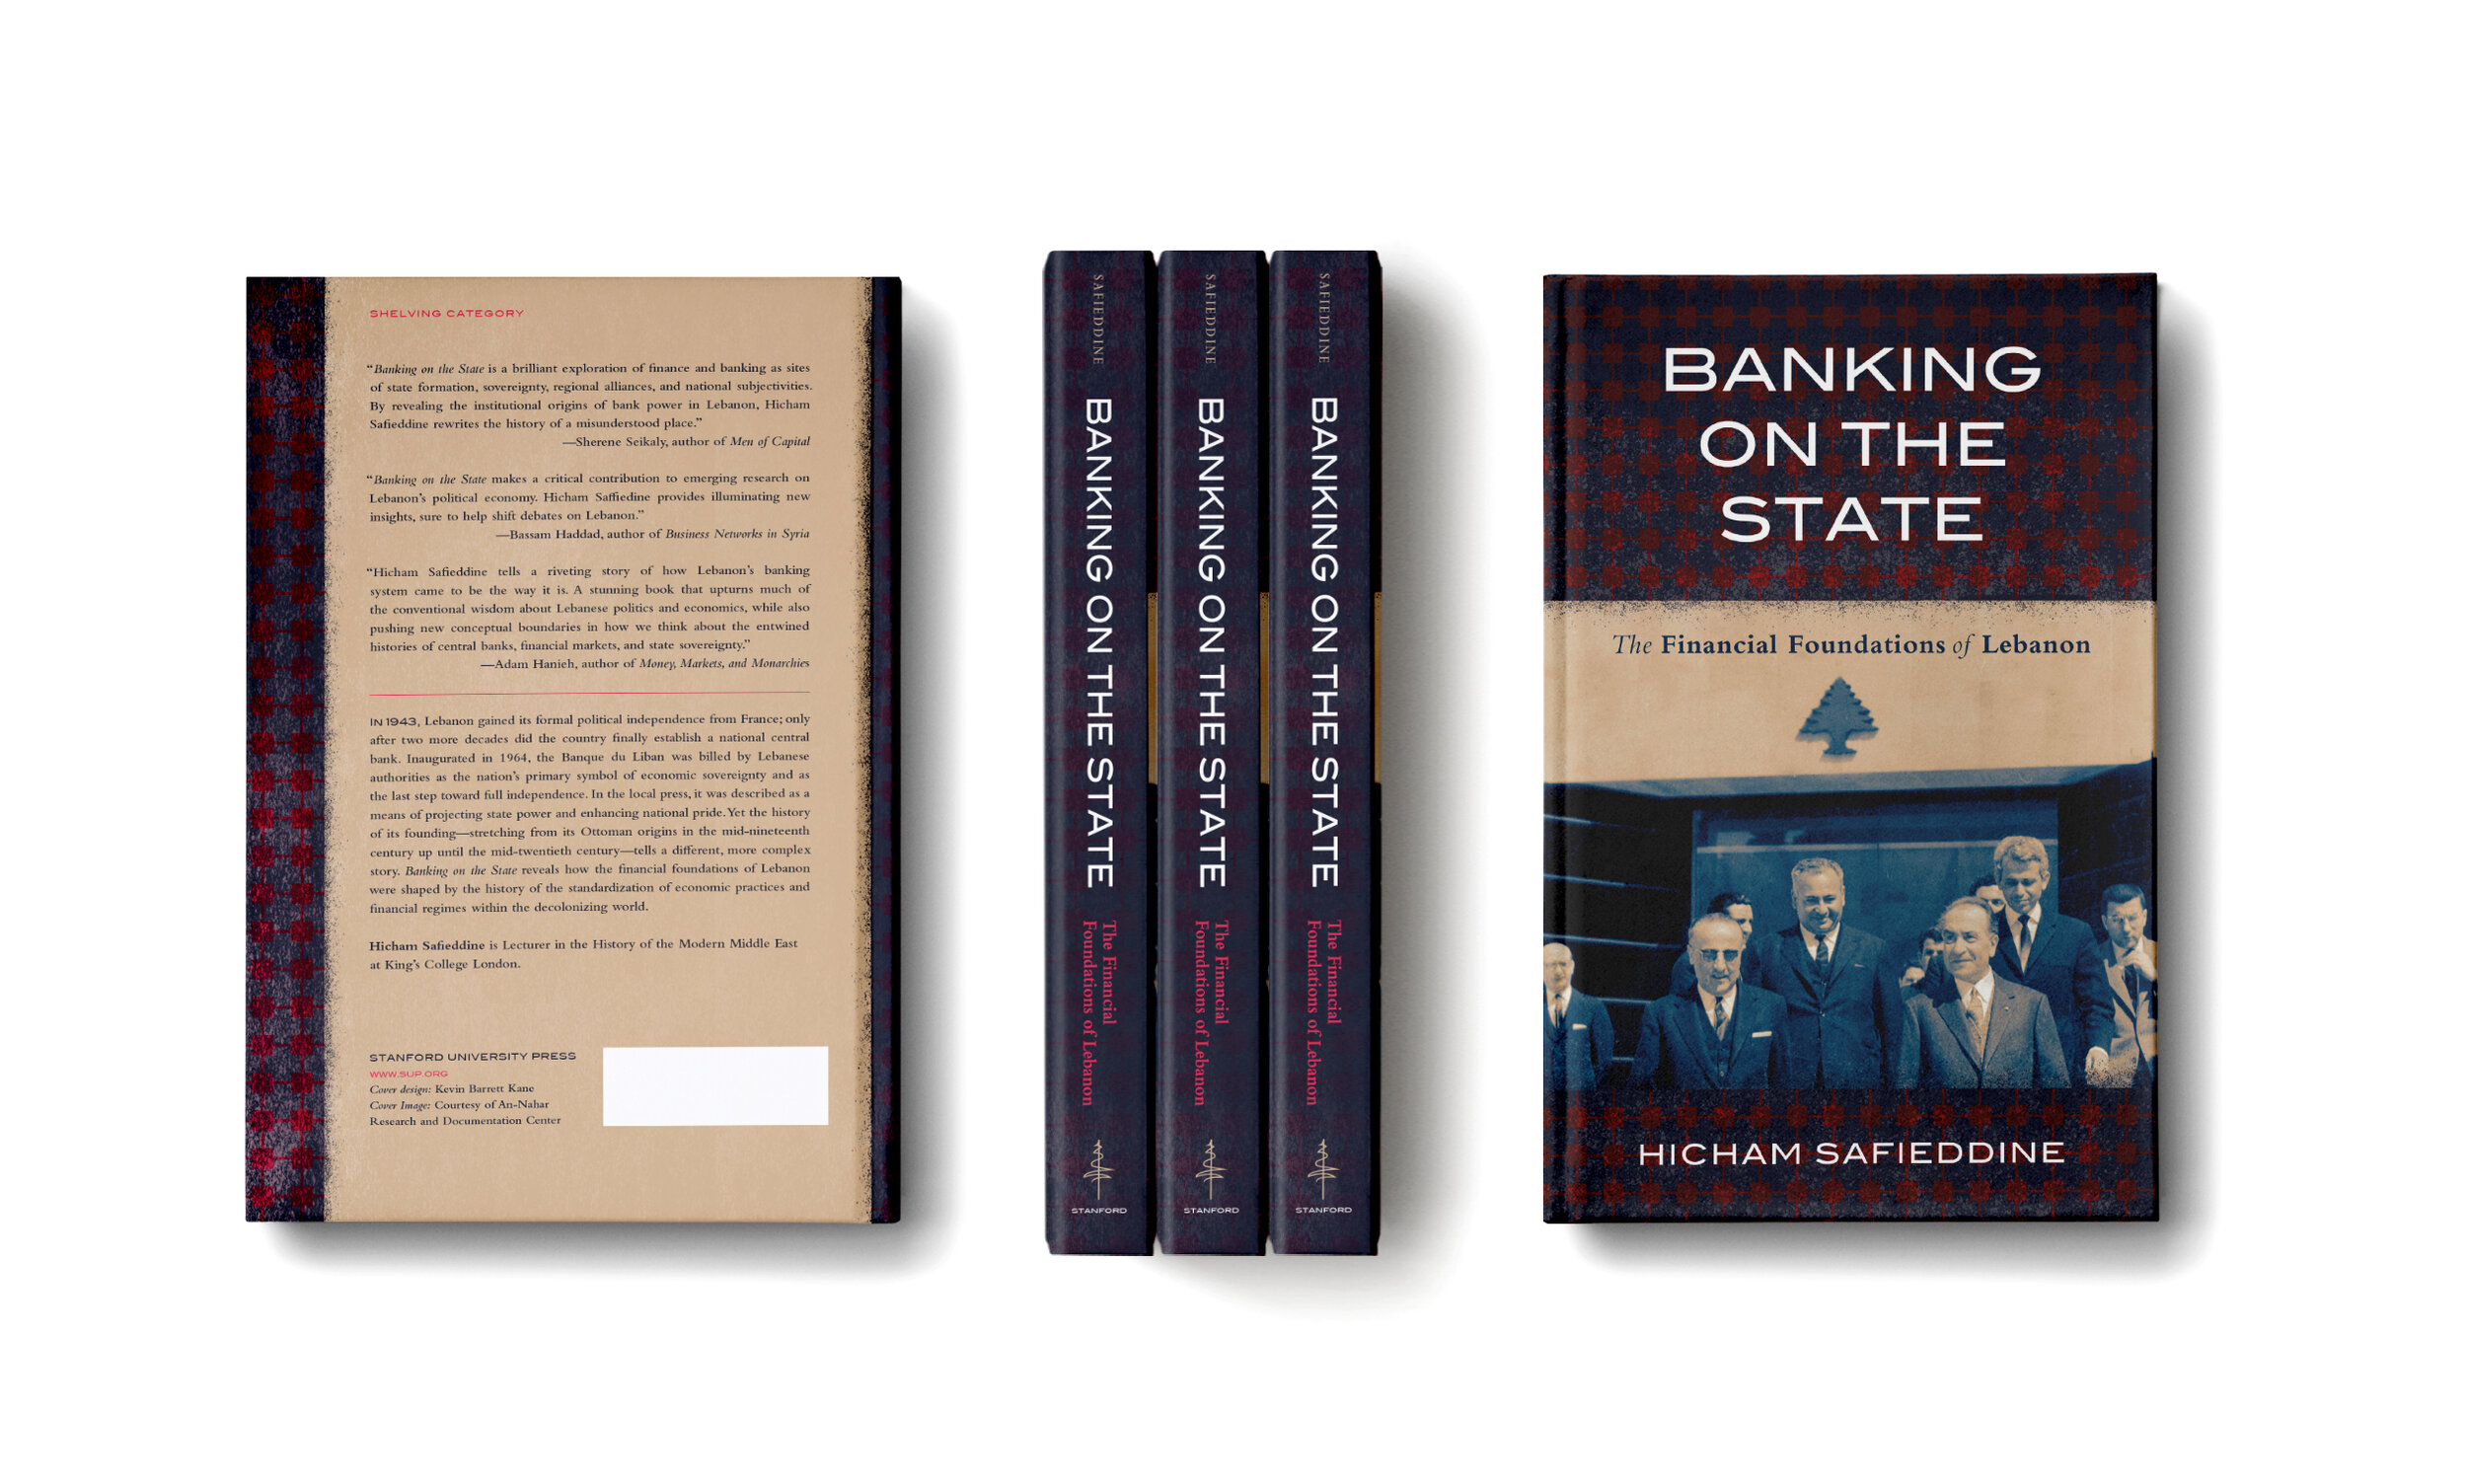 Banking on the State, by Hicham Safieddine (Stanford, 2019)